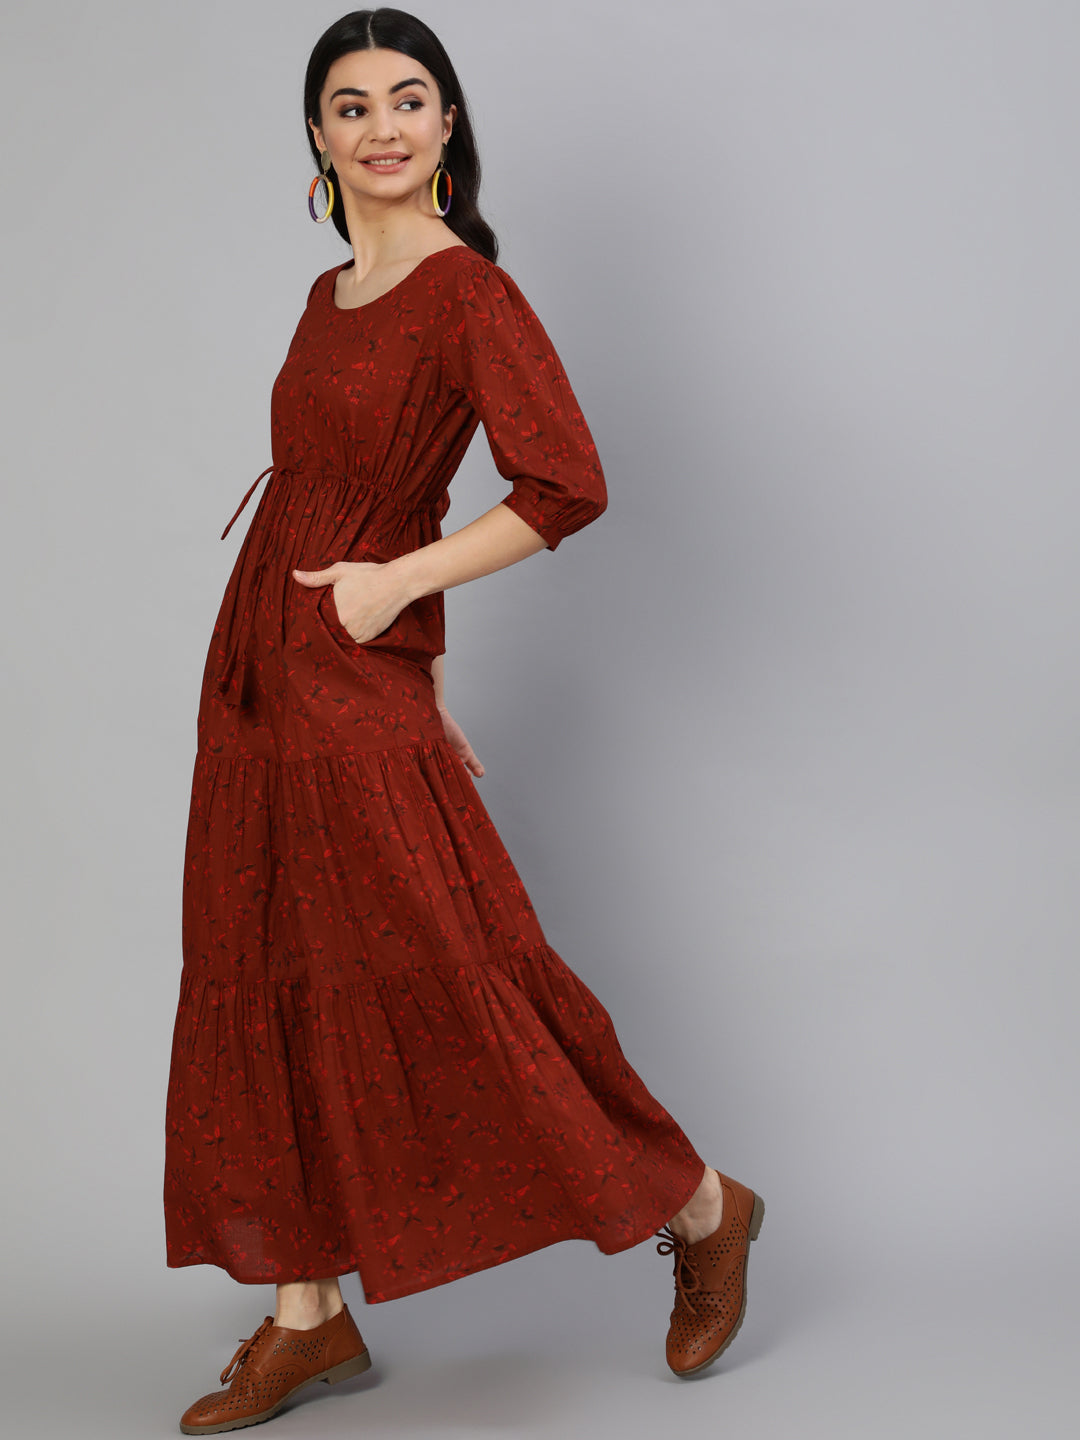 Women's Maroon Printed Tiered Dress With Three Quarter Sleeves - Nayo Clothing